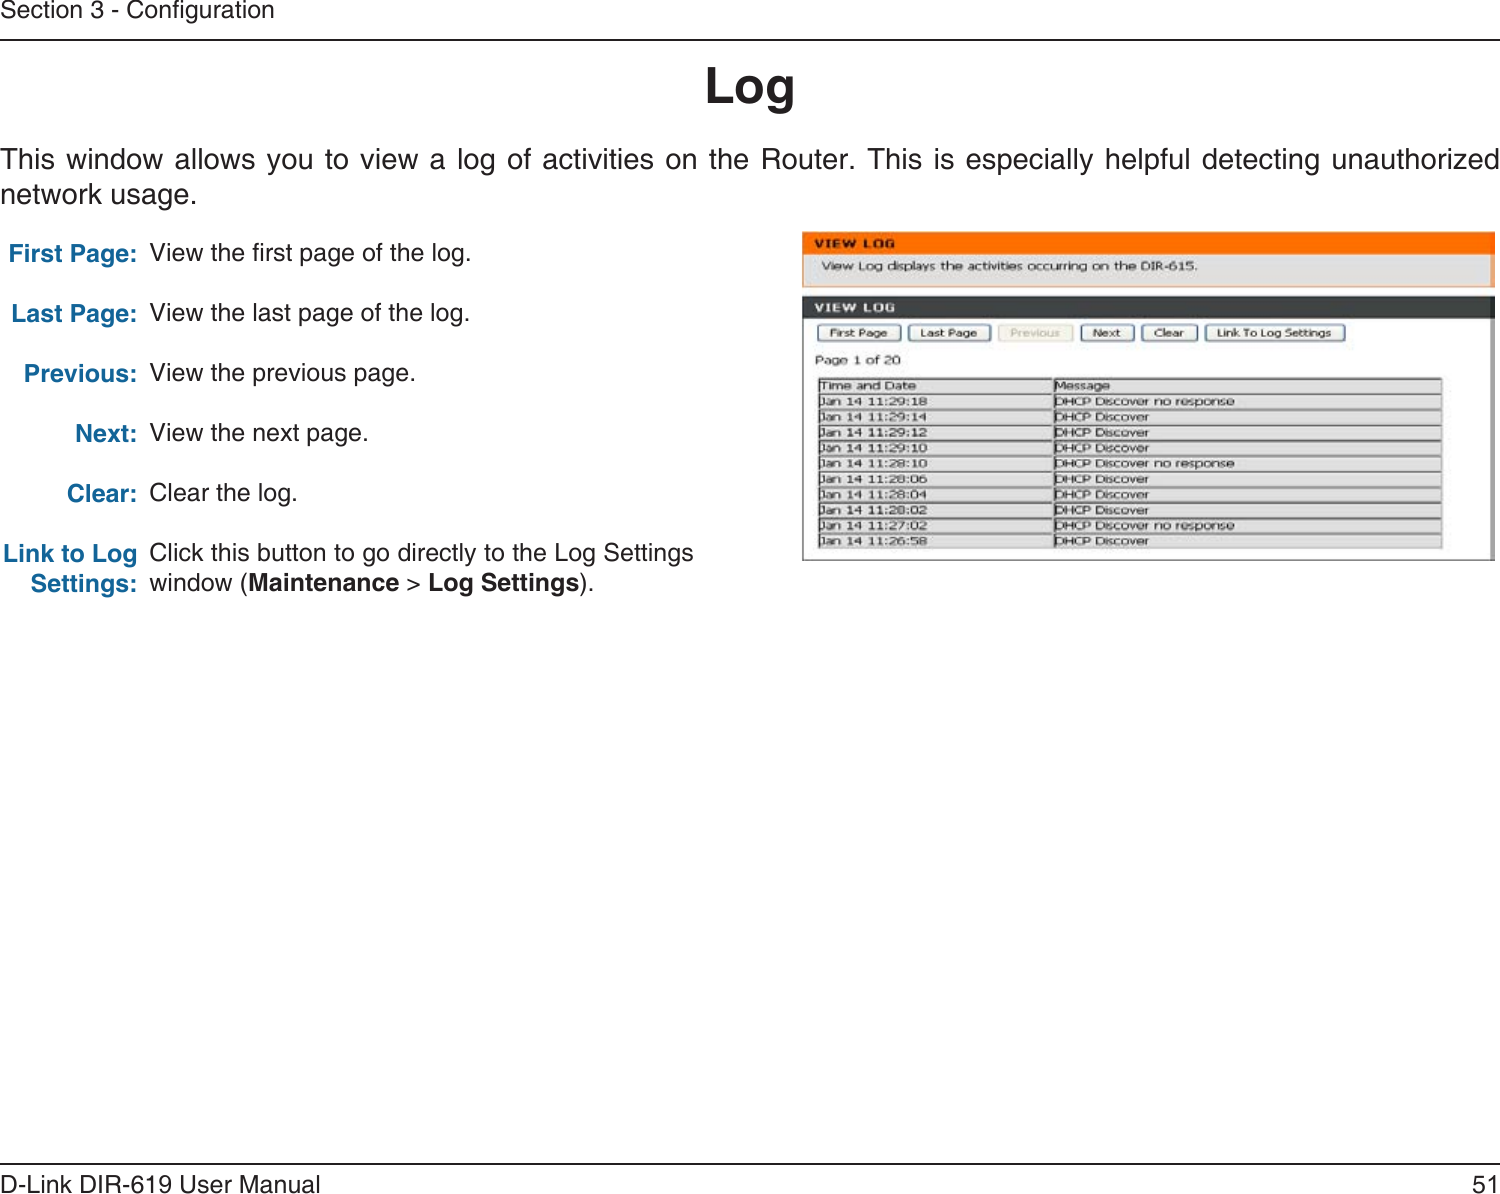 51D-Link DIR-619 User ManualSection 3 - CongurationLogFirst Page:Last Page:Previous:Next:Clear:Link to Log Settings:View the rst page of the log.View the last page of the log.View the previous page.View the next page.Clear the log.Click this button to go directly to the Log Settings window (Maintenance &gt; Log Settings).This window allows you to view a log of activities on the Router. This is especially helpful detecting unauthorizednetwork usage.